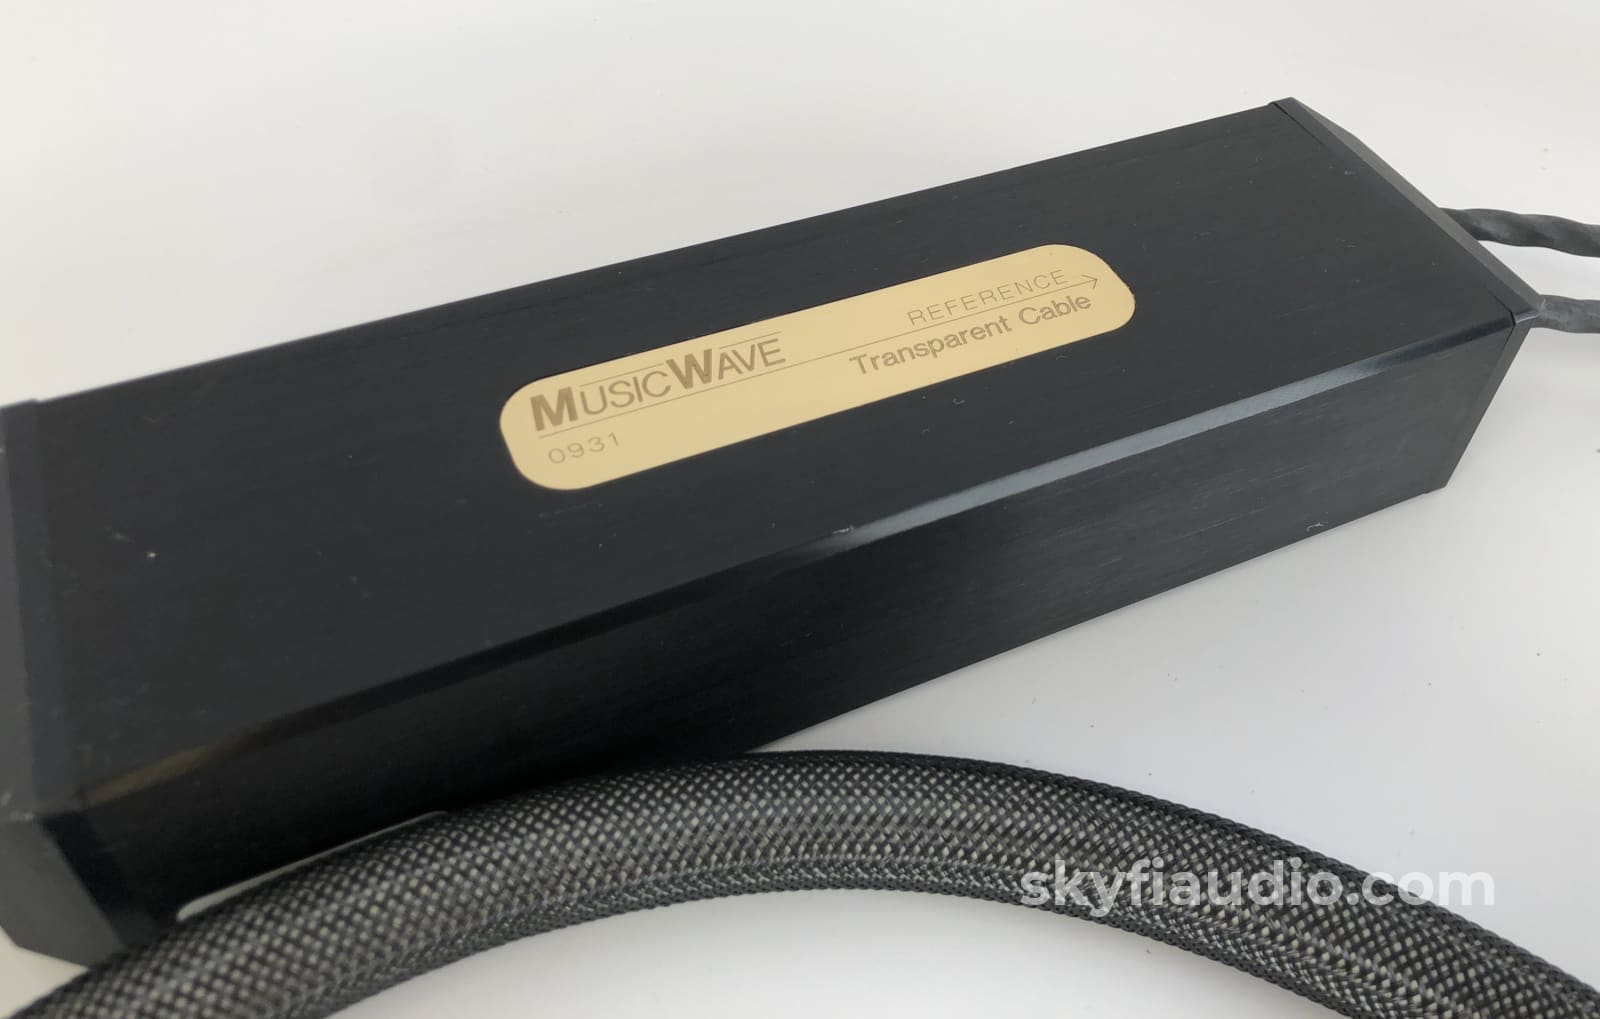 Transparent Audio Musicwave Reference Speaker Cables (Pair) - 2.5M